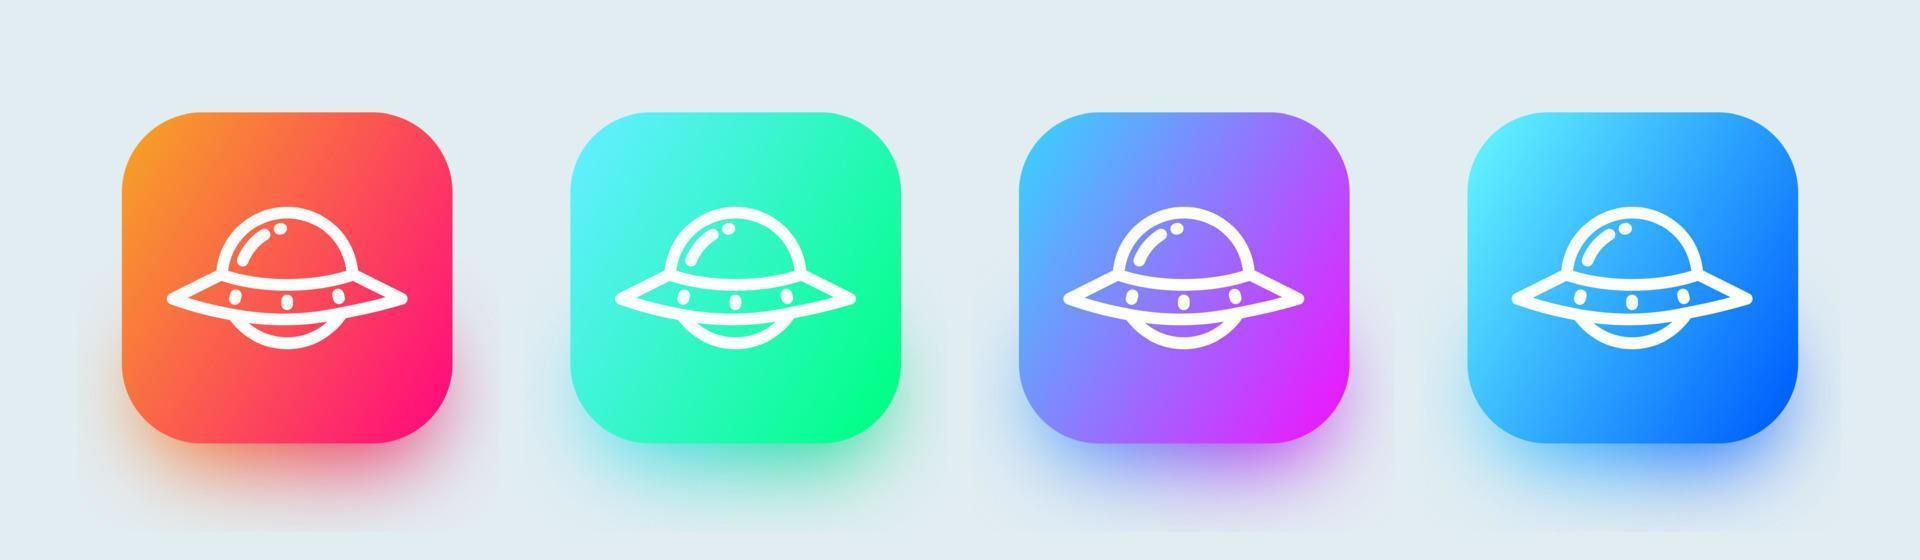 Ufo line icon in square gradient colors. Alien space ship signs vector illustration.